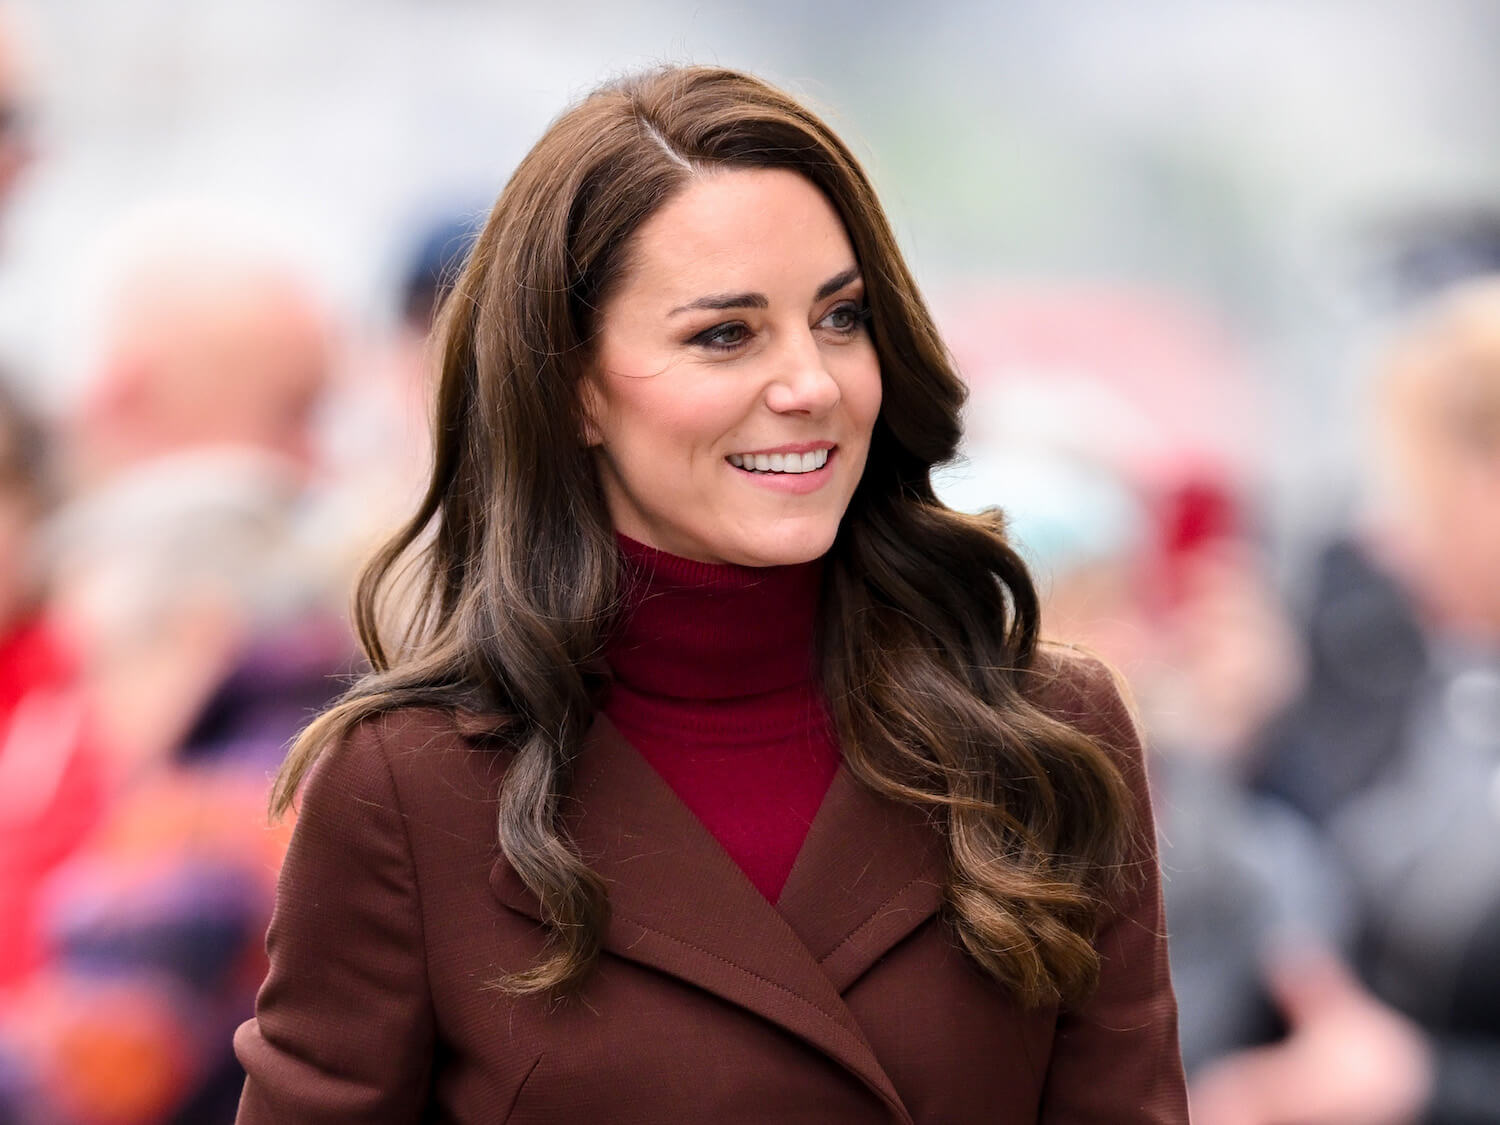 Kate Middleton, mom to three children, smiling in a brown coat and red sweater.
